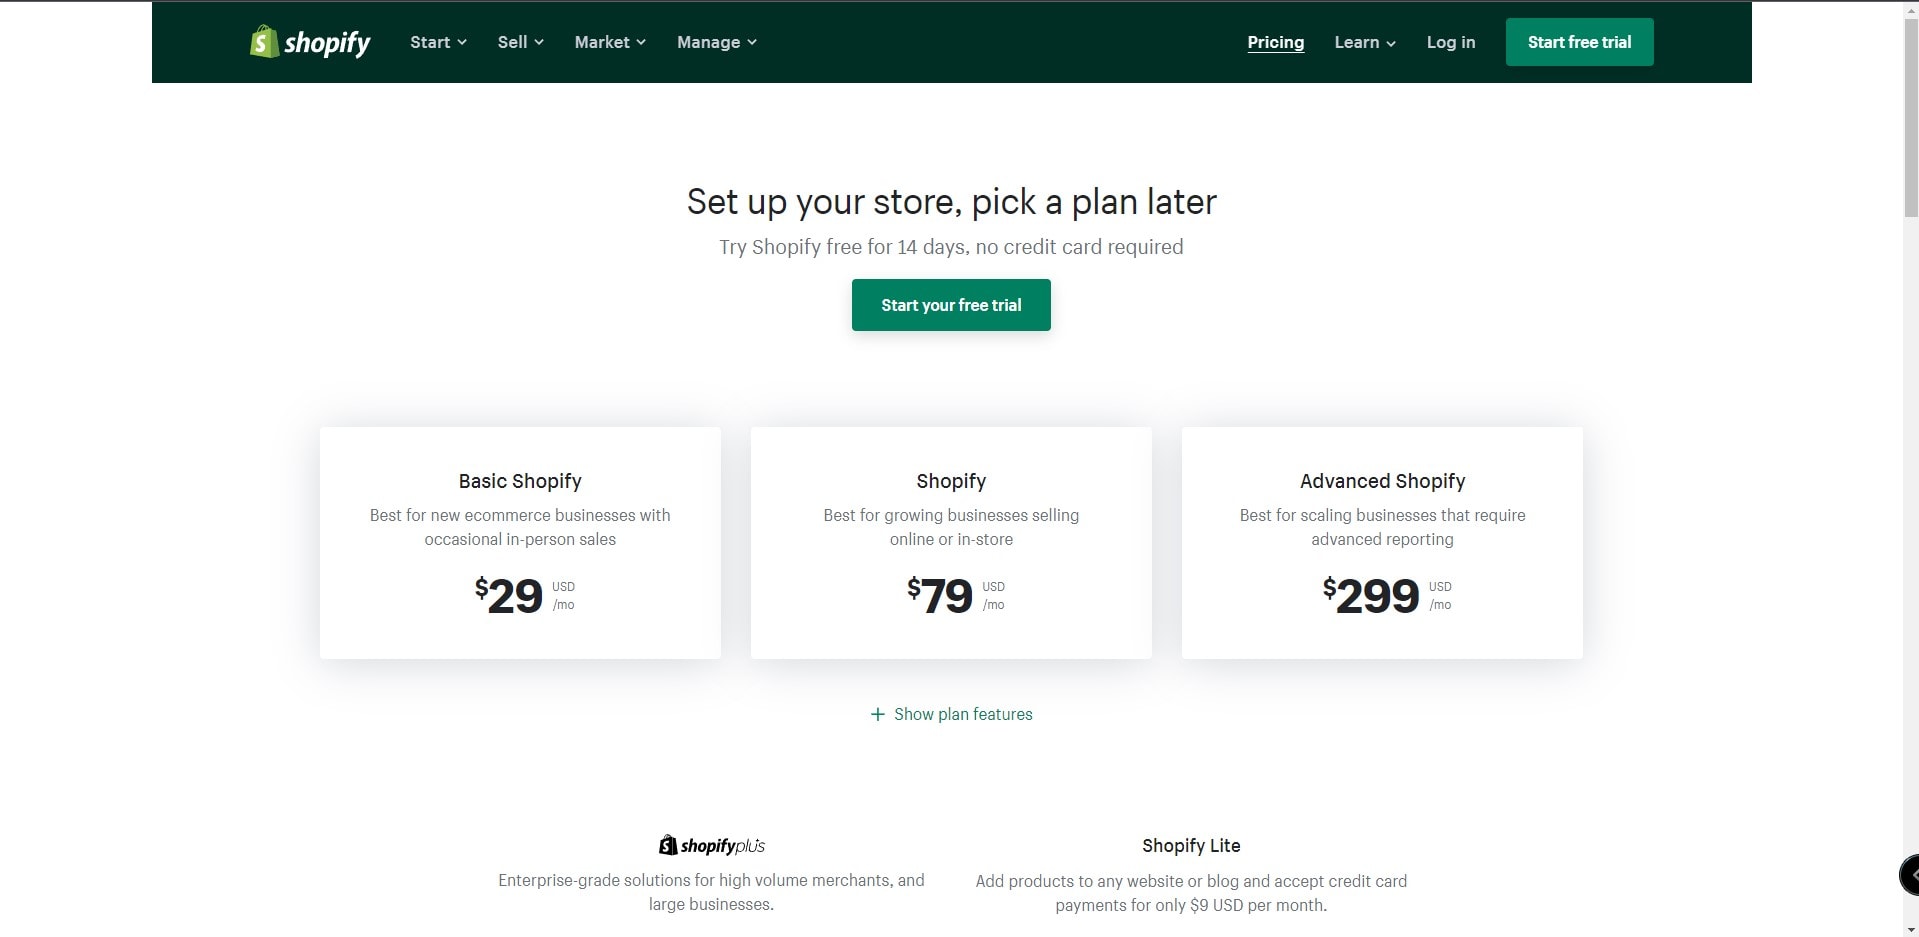 Shopify pricing plans subsite with different price options and descriptions